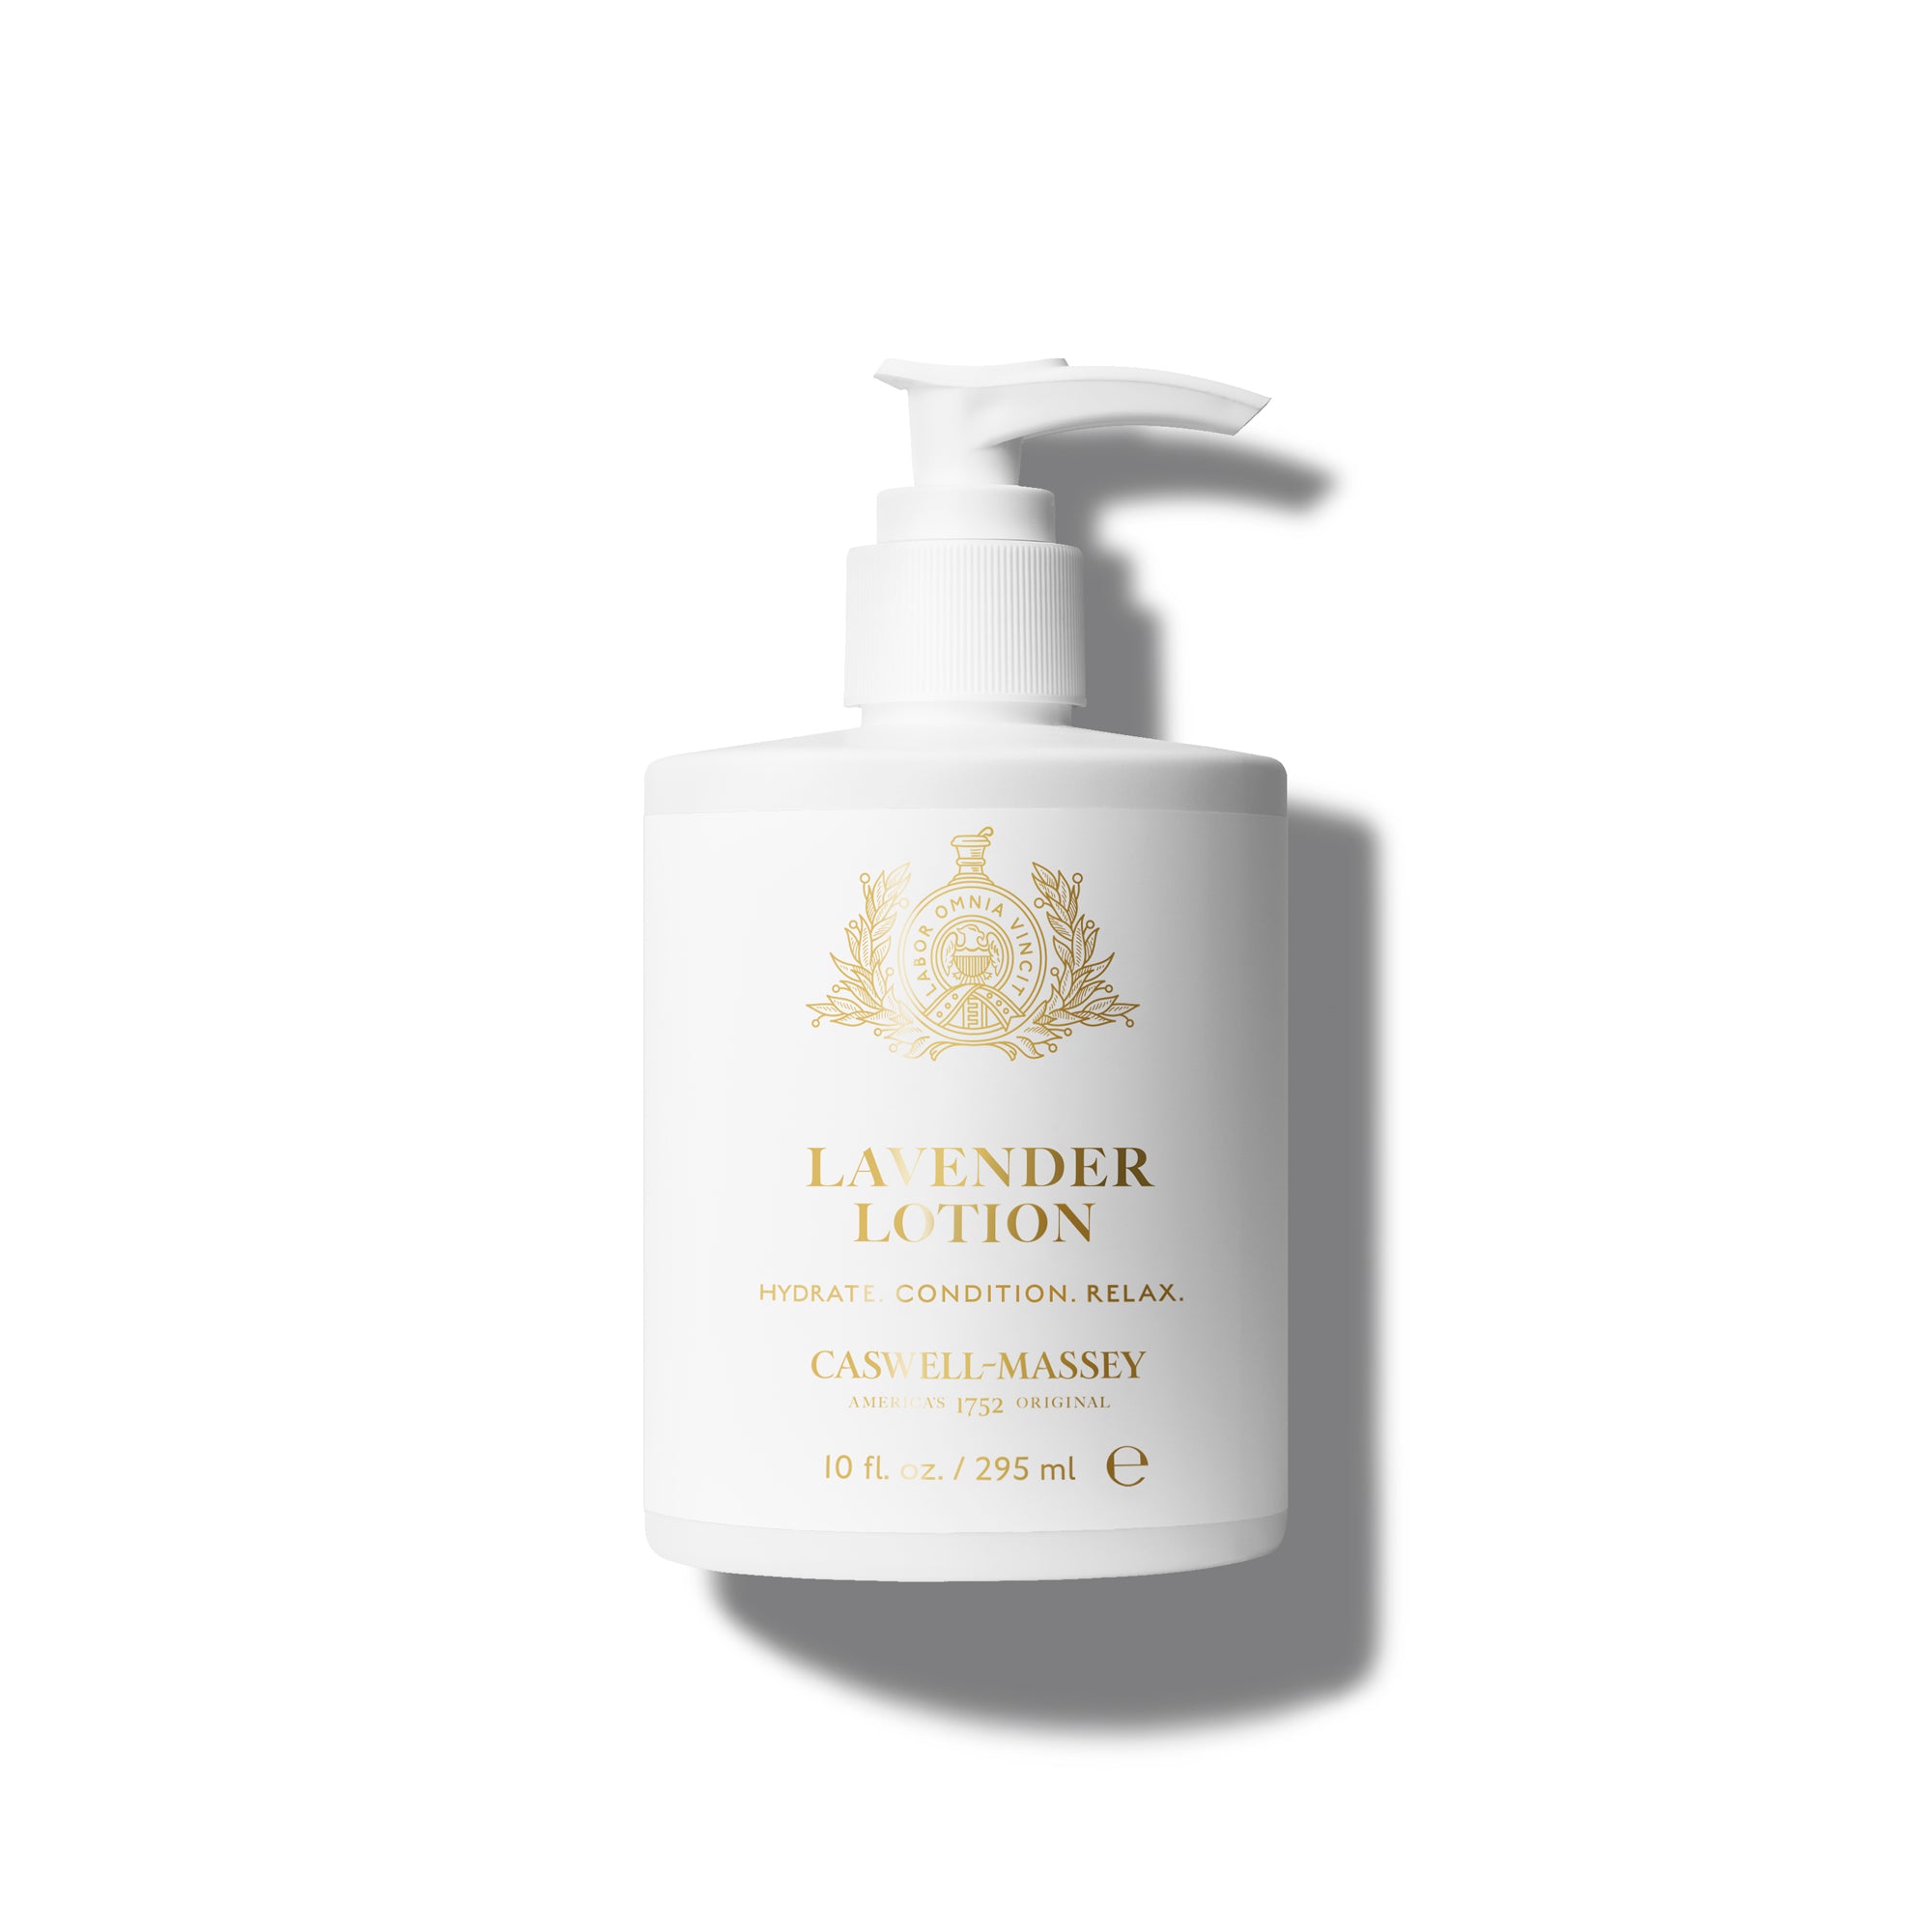 Lavender Lotion Body Lotion Caswell-Massey®   